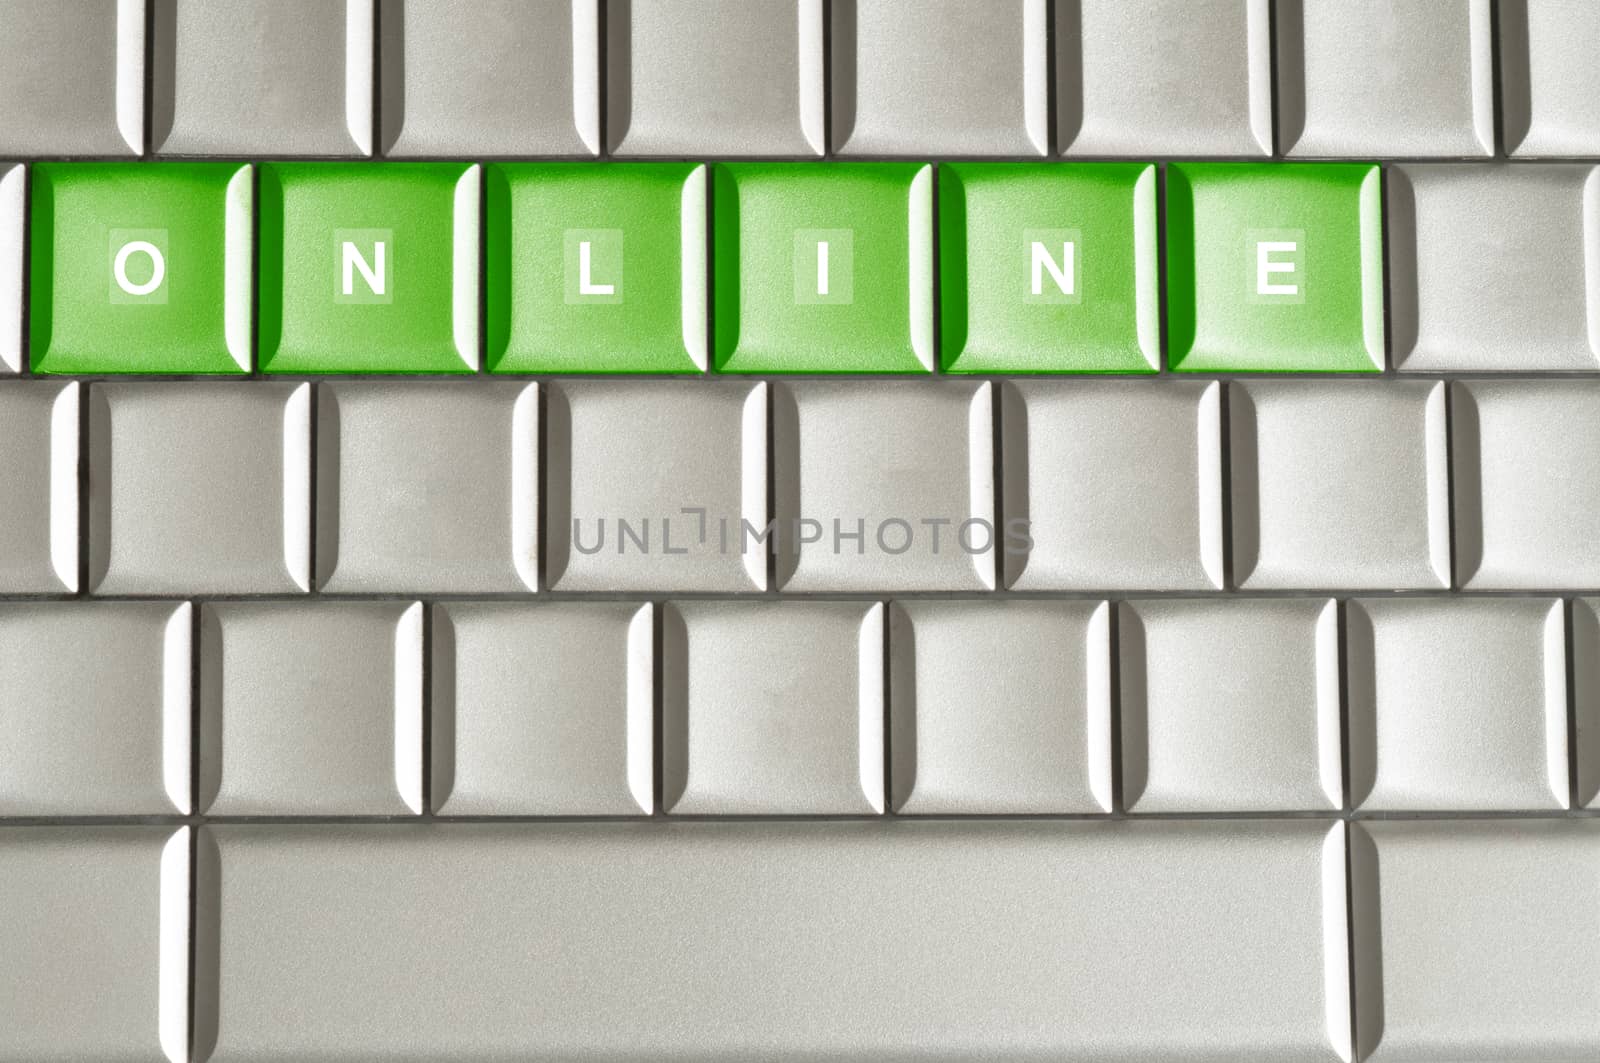 Metallic keyboard with the word ONLINE by daoleduc